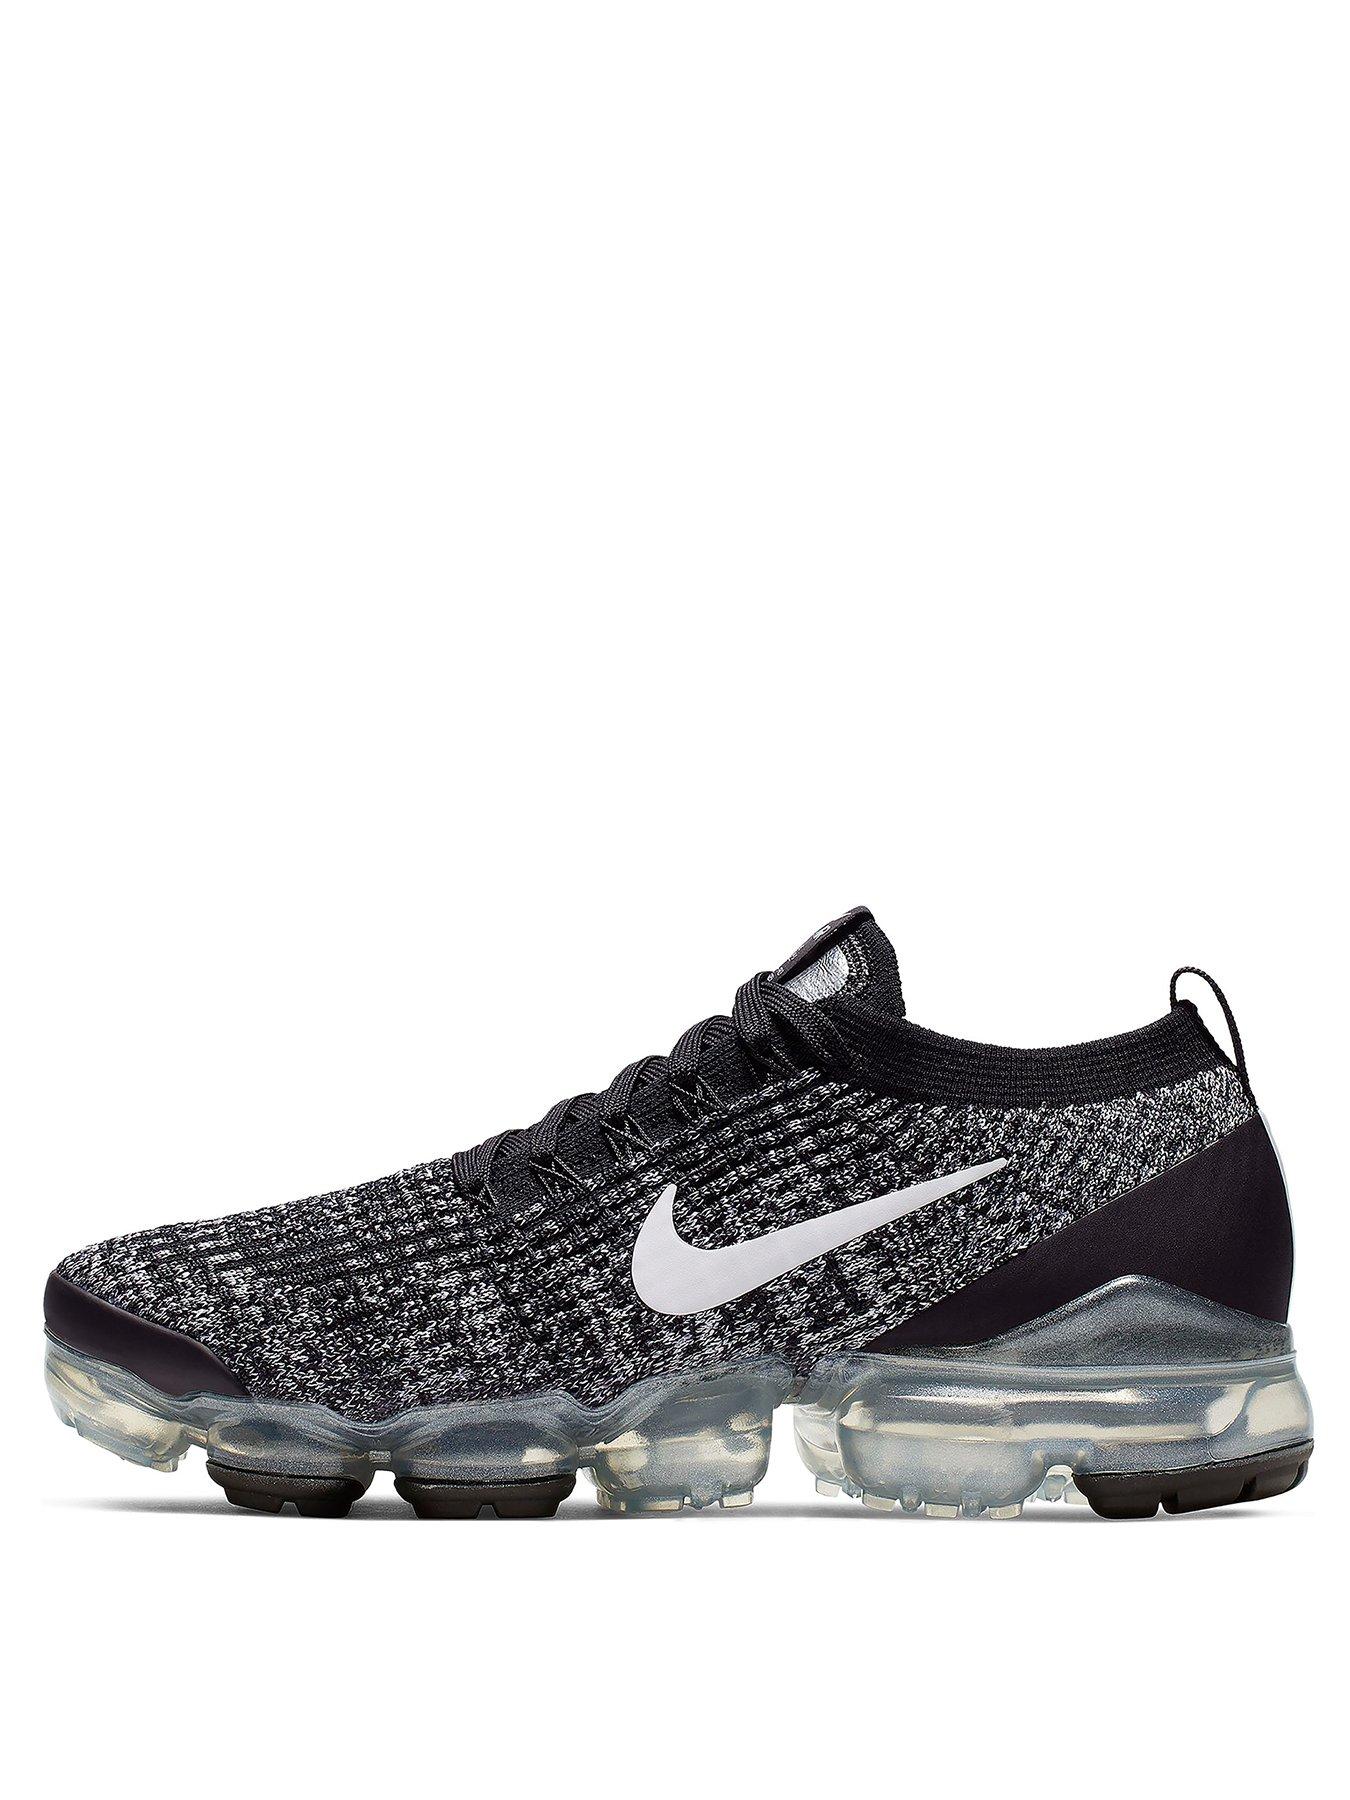 vapormax sizing fit